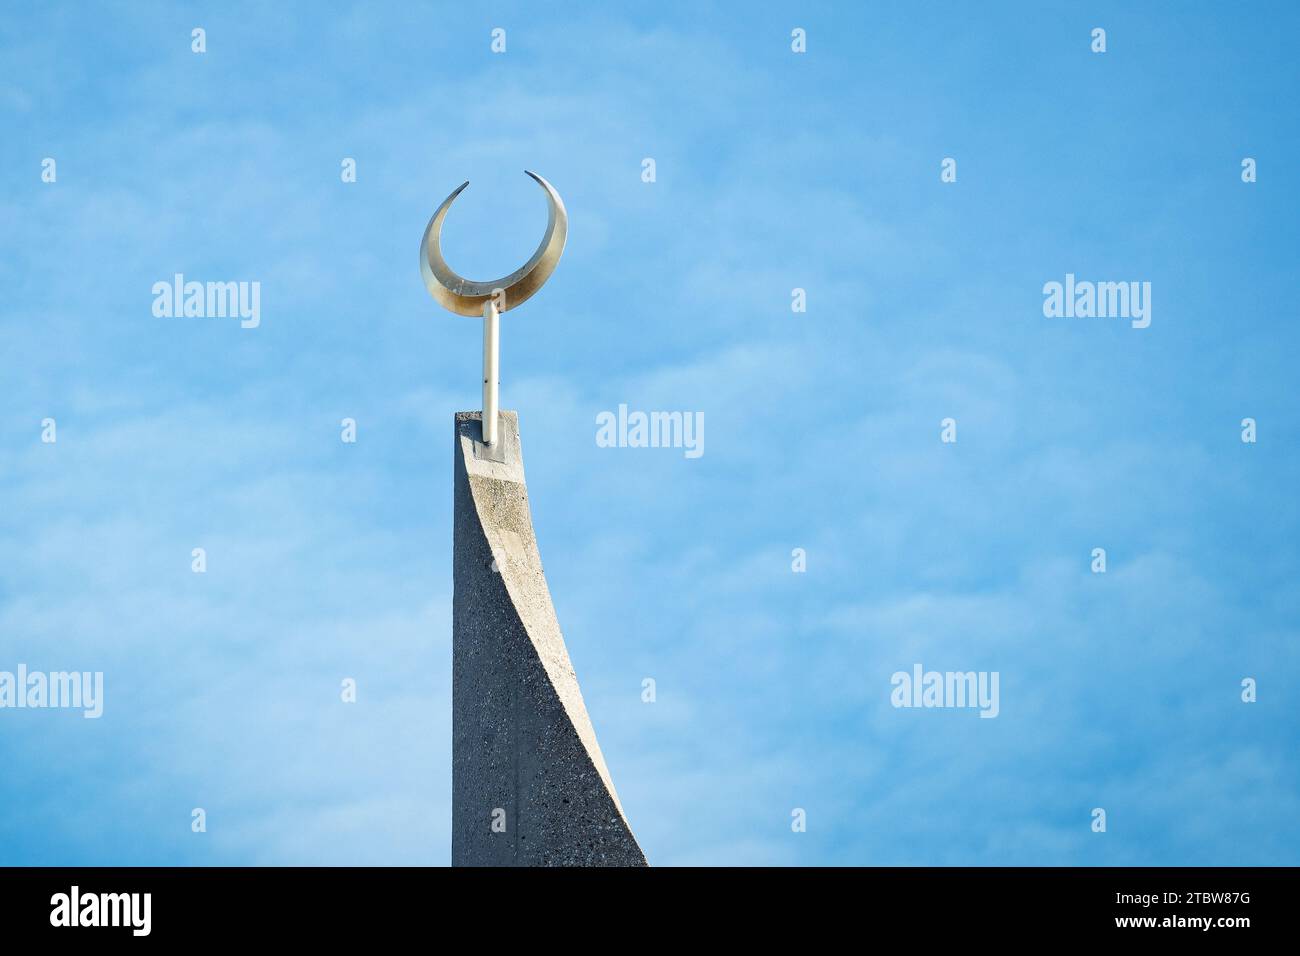 the golden crescent on one of the two minarets of the central mosque in cologne ehrenfeld Stock Photo